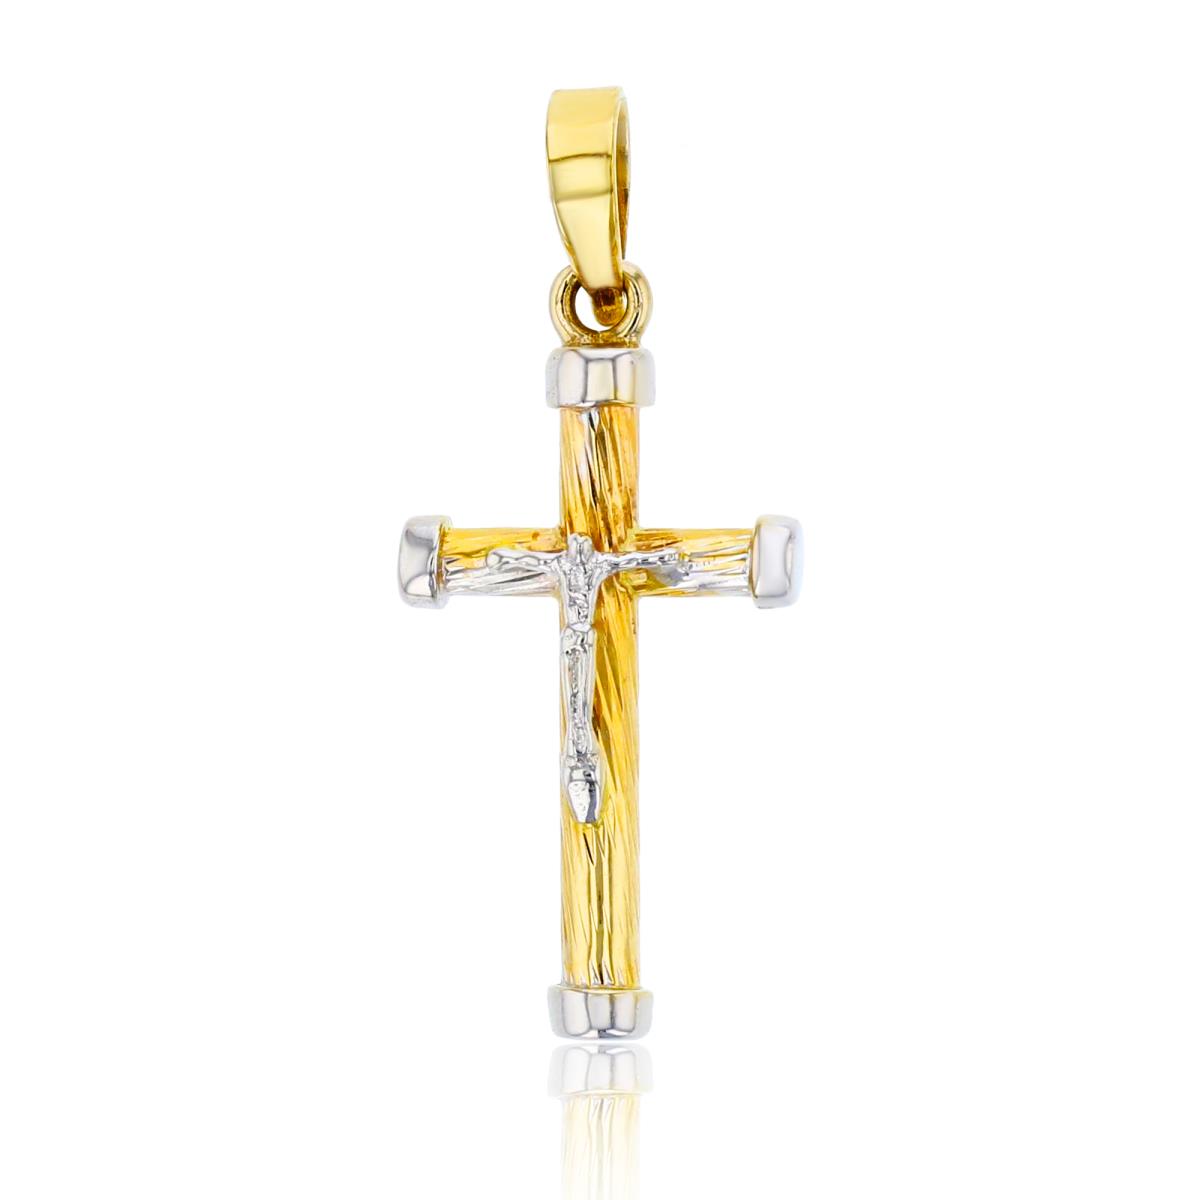 14K Two-Tone Gold 28x11mm Polished & Textured Crucifix Cross Pendant